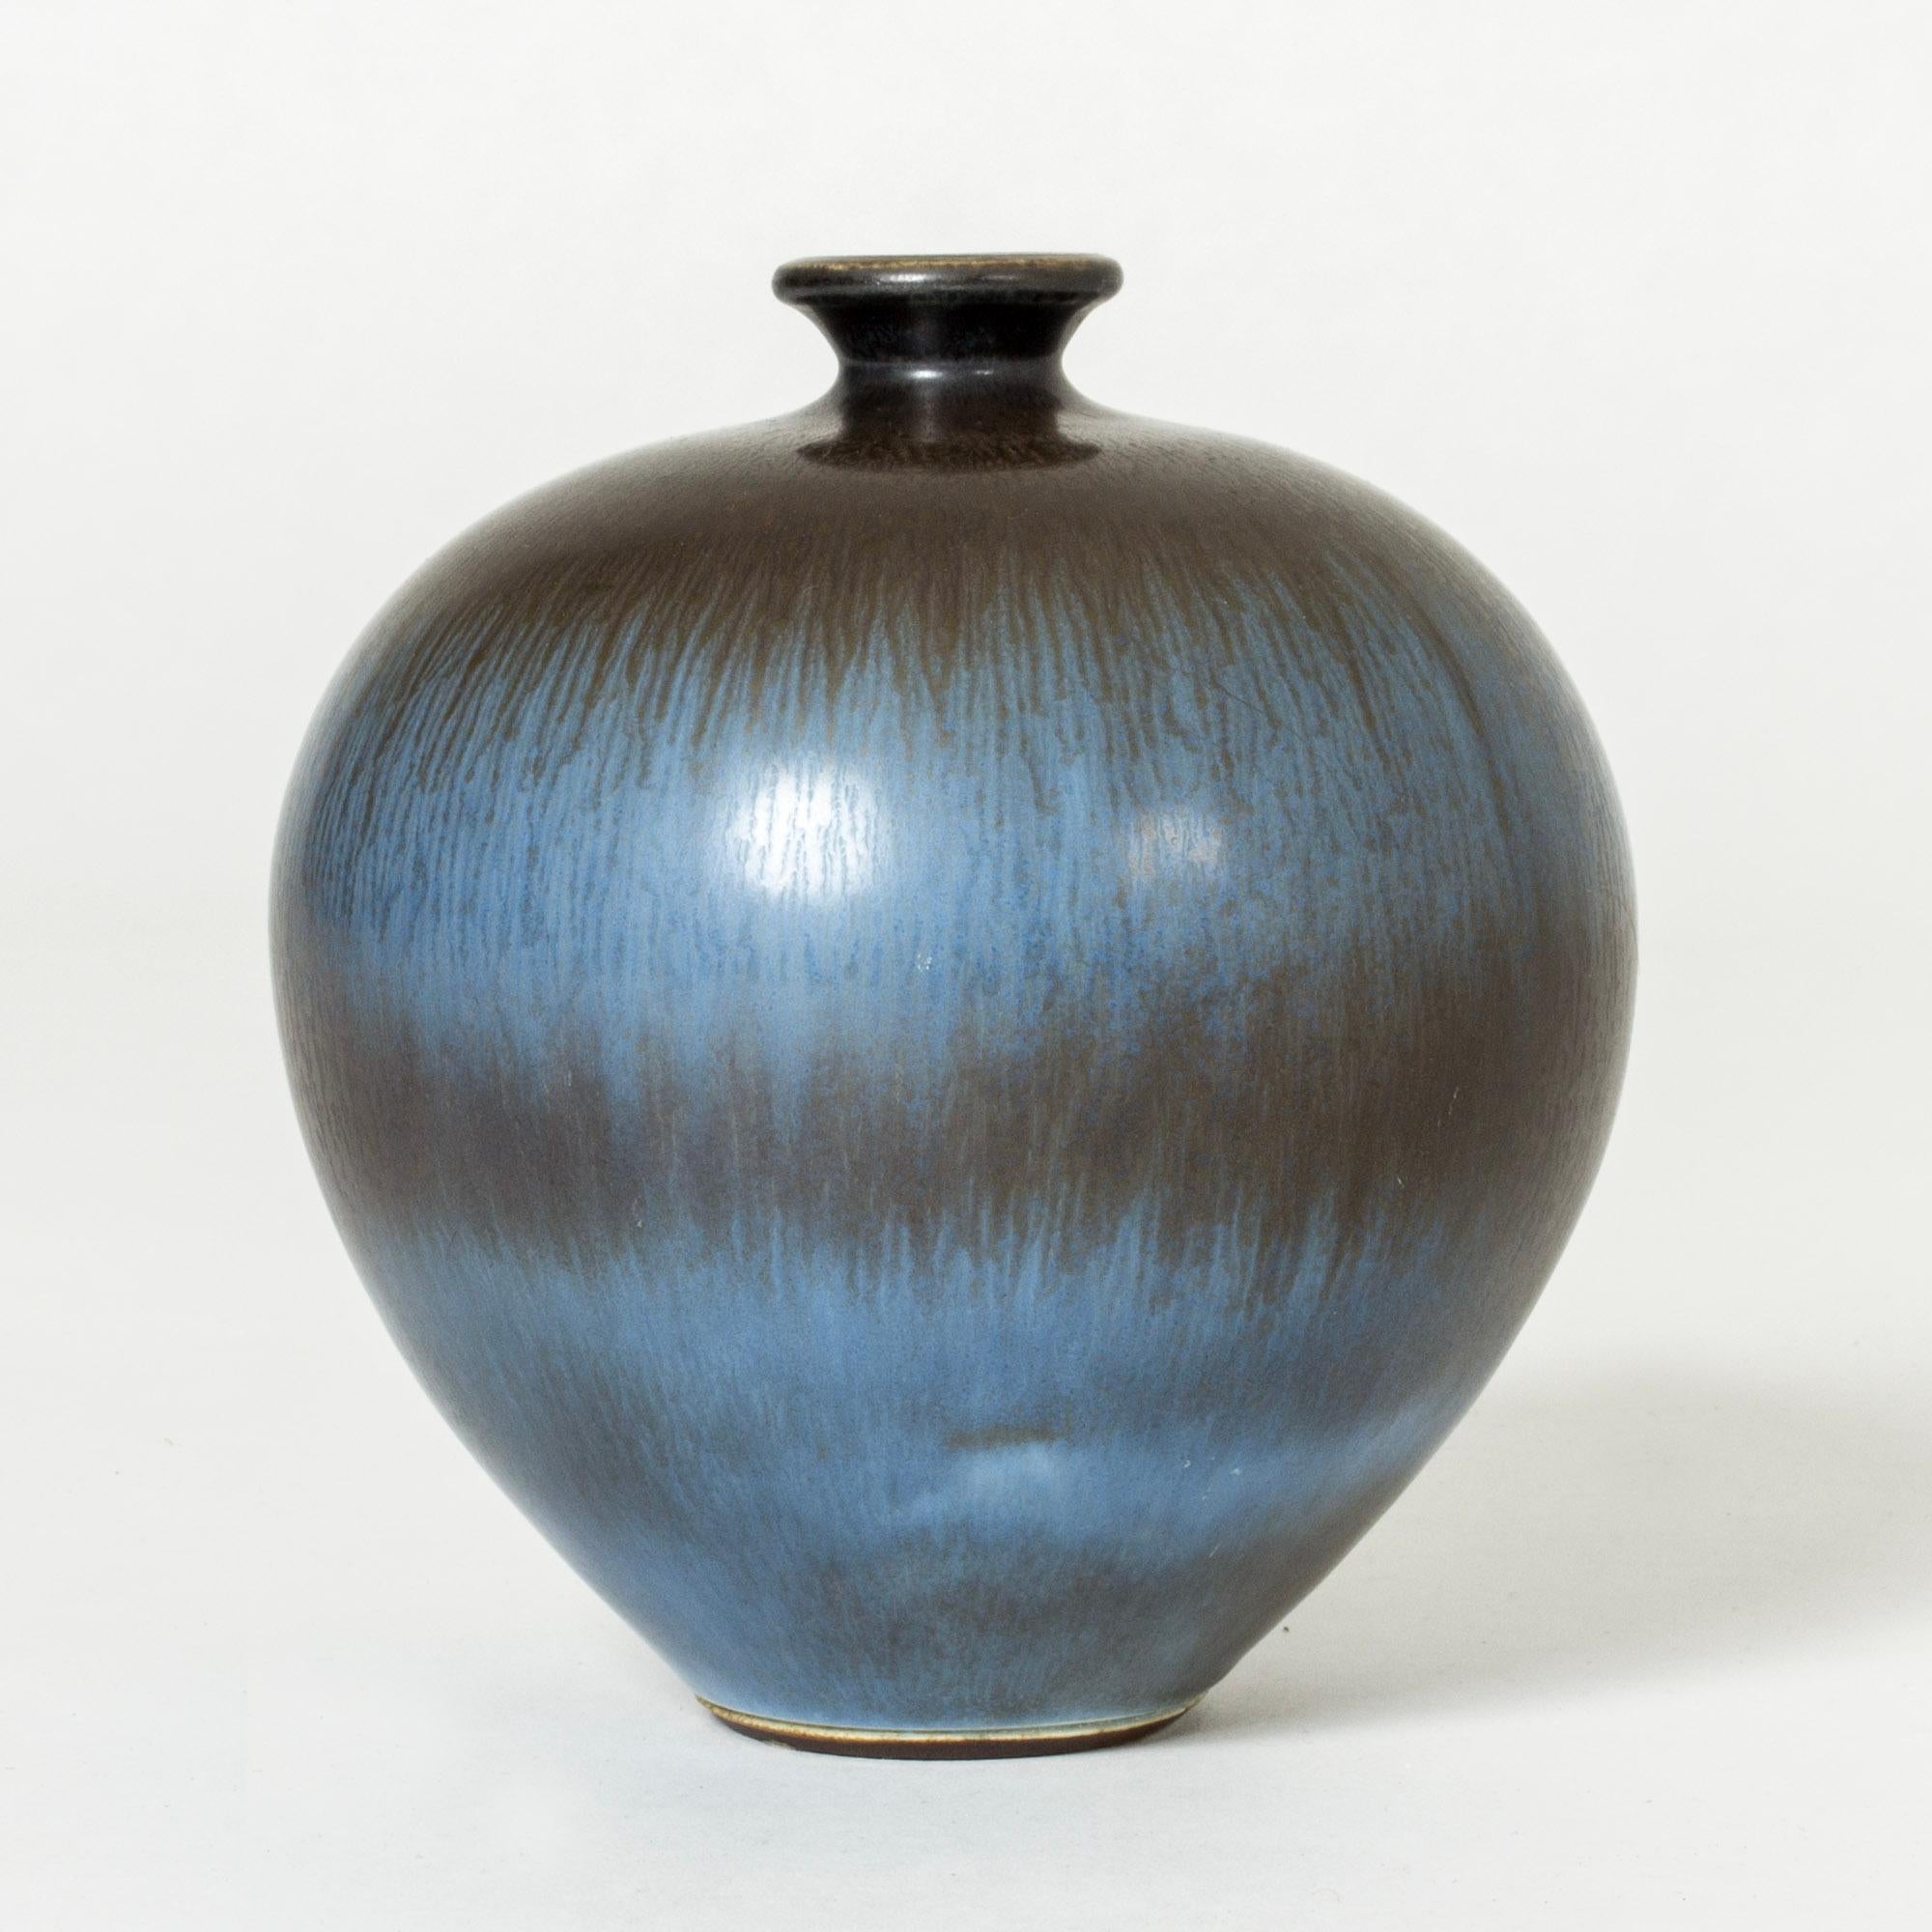 Beautiful stoneware vase by Berndt Friberg, in a plump form. Striking hare’s fur glaze in blue and dark brown blending into each other in wide stripes across the body.

Berndt Friberg was a Swedish ceramicist, renowned for his stoneware vases and